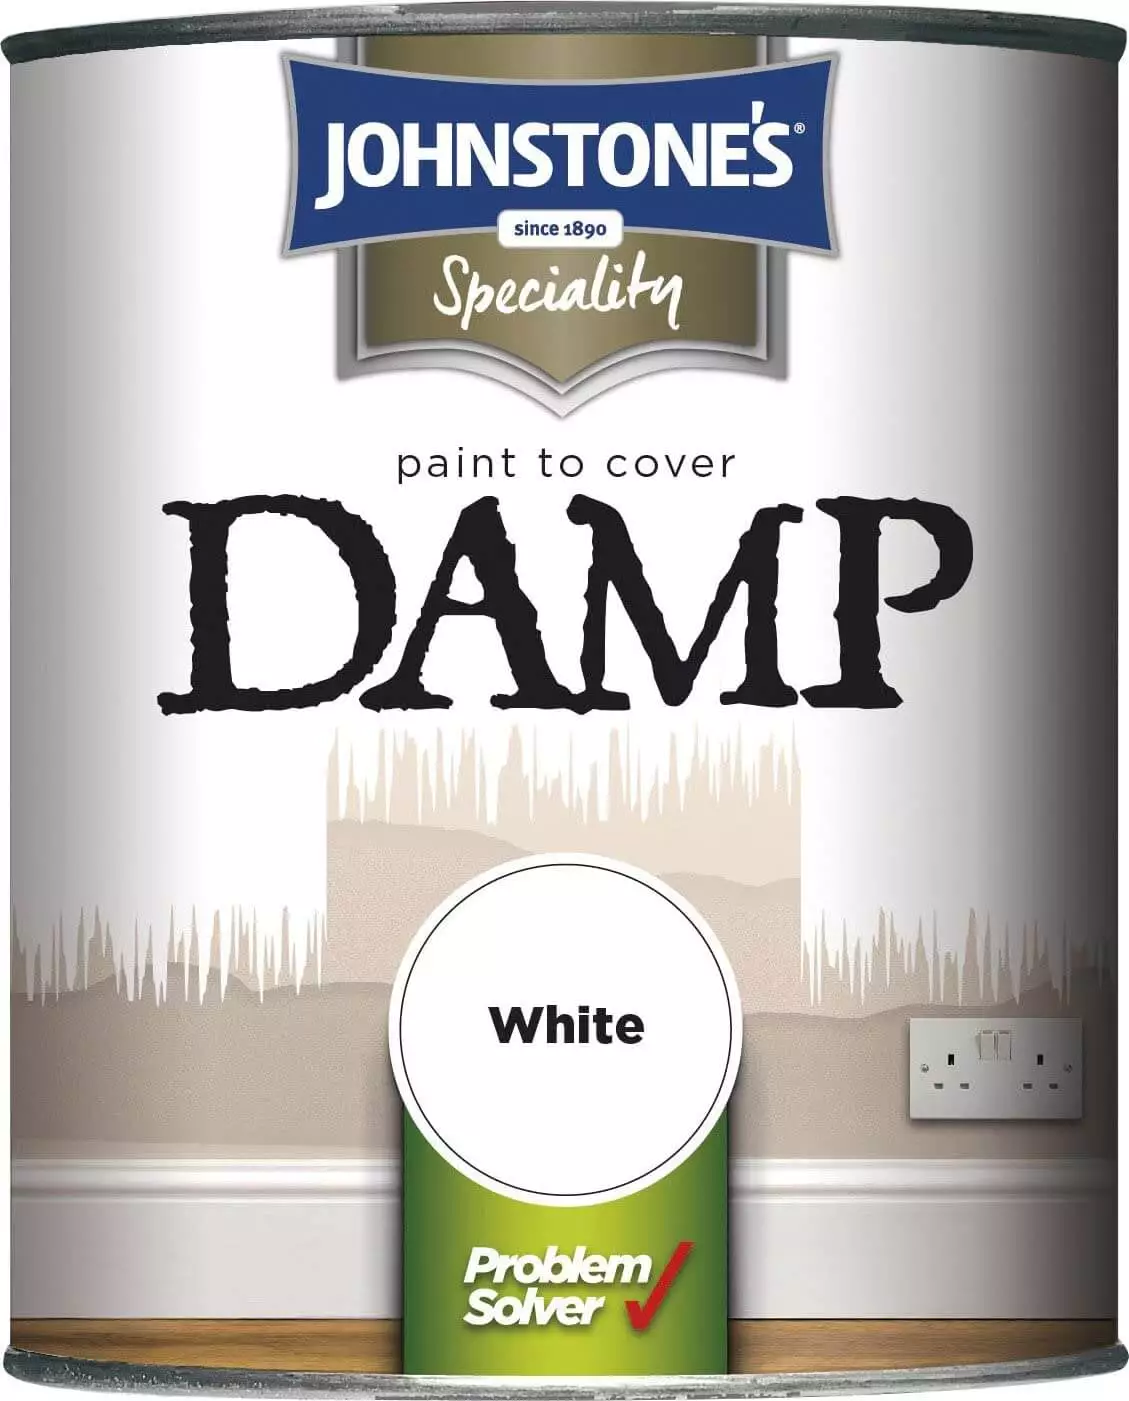 Johnstone's 307955 Paint to Cover Damp White